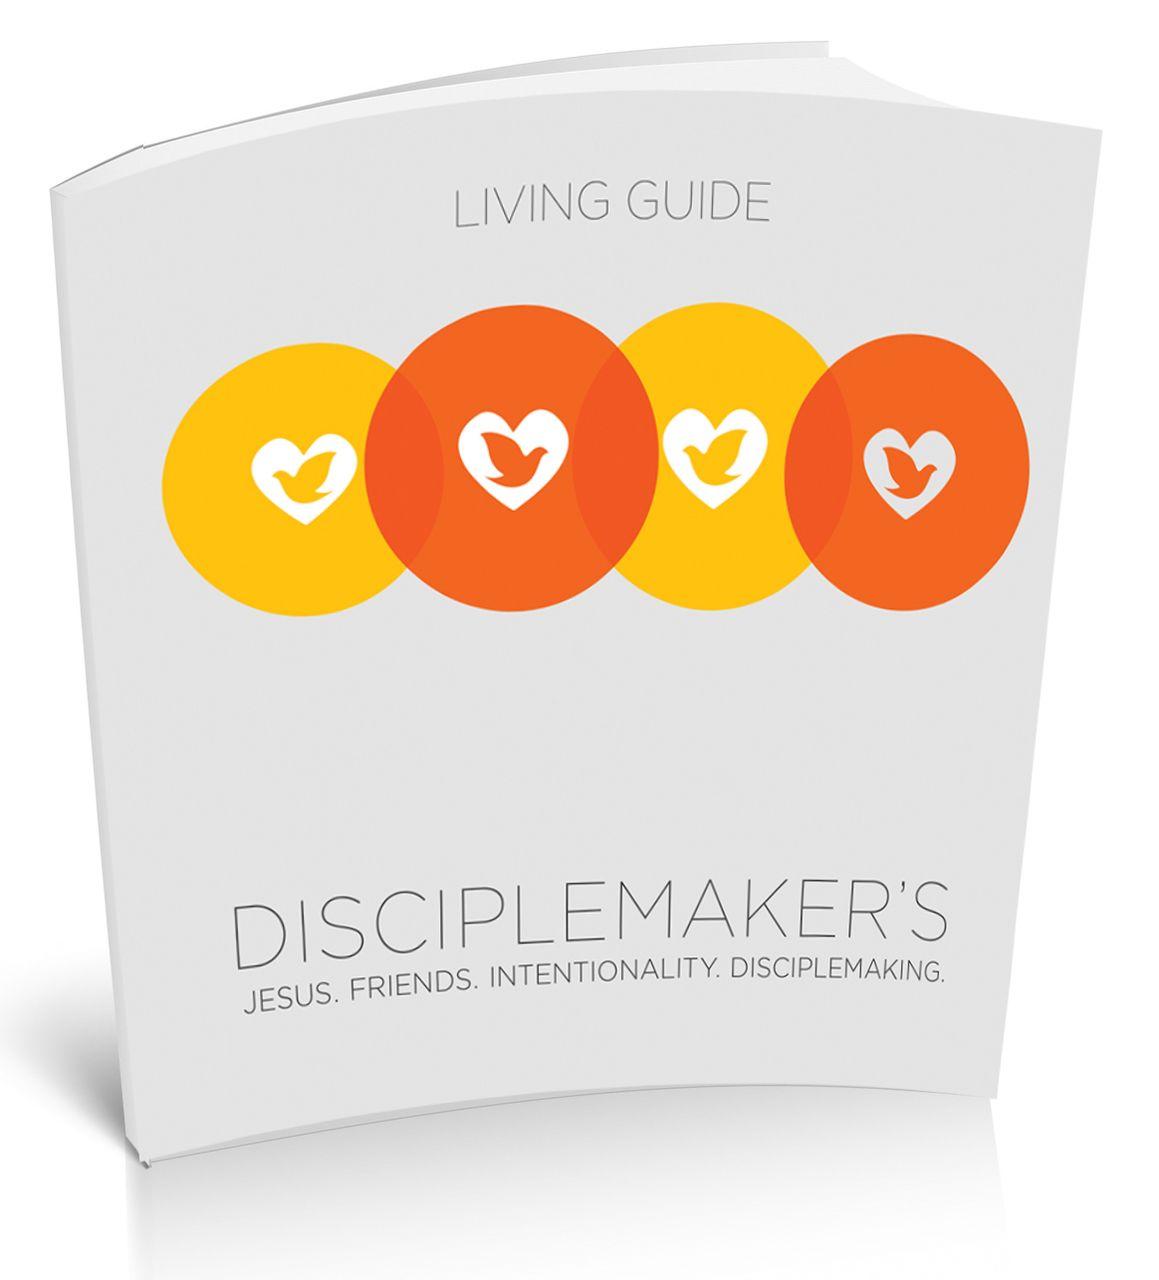 Disciple Maker Logo - Disciplemaker's Living Guide - Cadre Missionaries Resources & Support